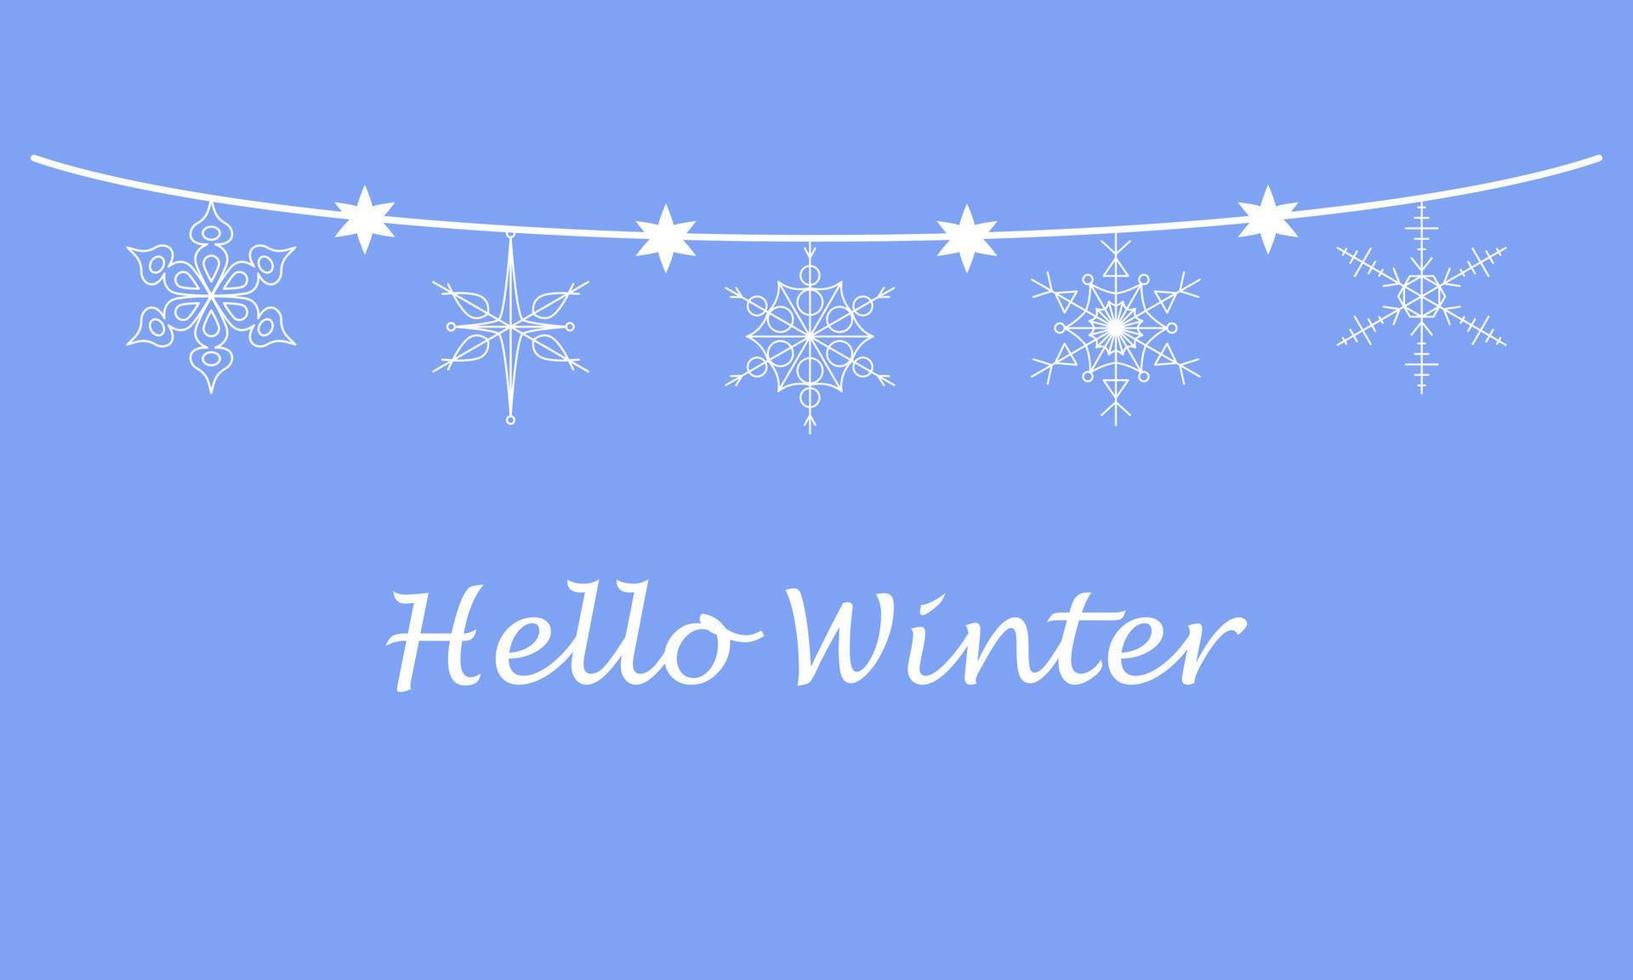 Banner hello winter with a garland of snowflakes. vector illustration